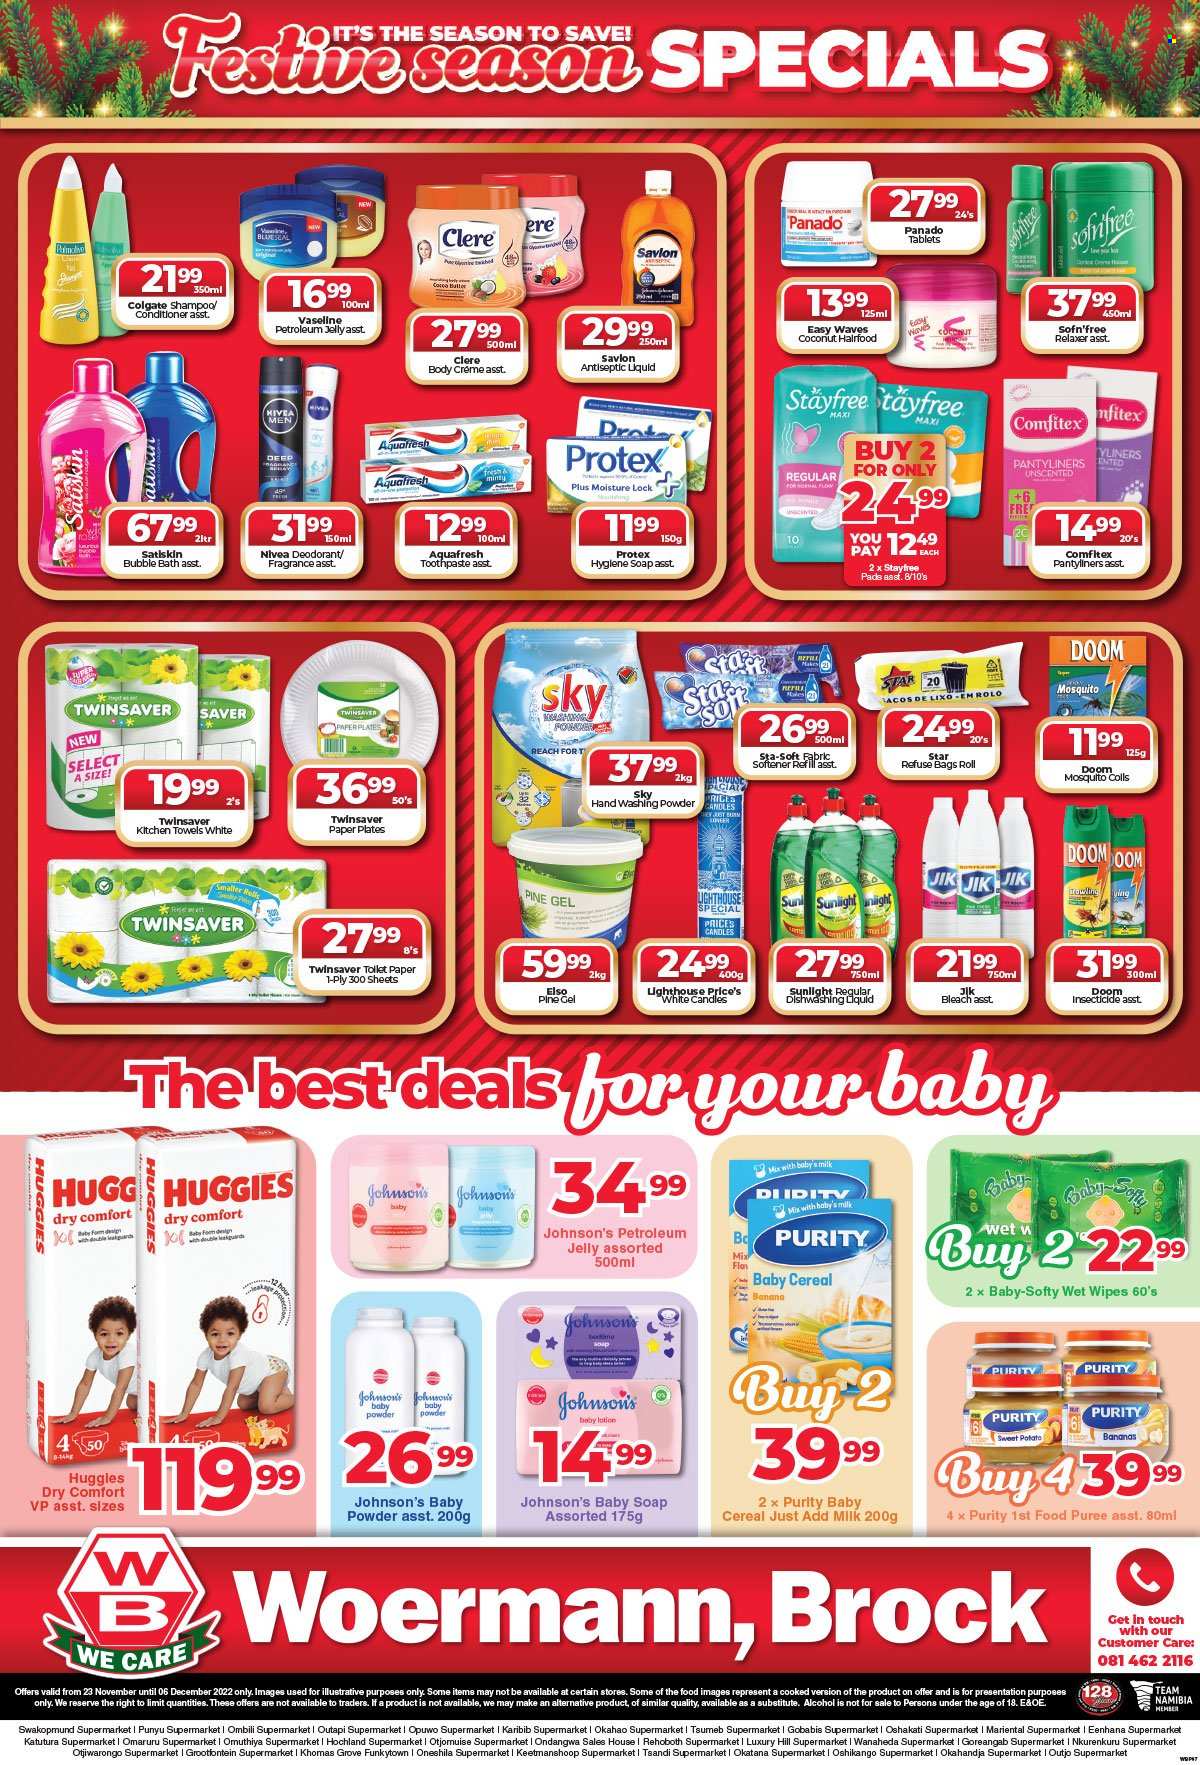 thumbnail - Woermann Brock catalogue  - 23/11/2022 - 06/12/2022 - Sales products - sweet potato, bananas, milk, cereals, alcohol, Purity, wipes, Huggies, Johnson's, kitchen towels, bleach, fabric softener, softener refill, laundry powder, Sunlight, dishwashing liquid, bubble bath, shampoo, Nivea, Palmolive, Protex, Vaseline, Satiskin, soap, Colgate, toothpaste, Stayfree, pantyliners, petroleum jelly, conditioner, body lotion, Clere, anti-perspirant, fragrance, deodorant. Page 7.